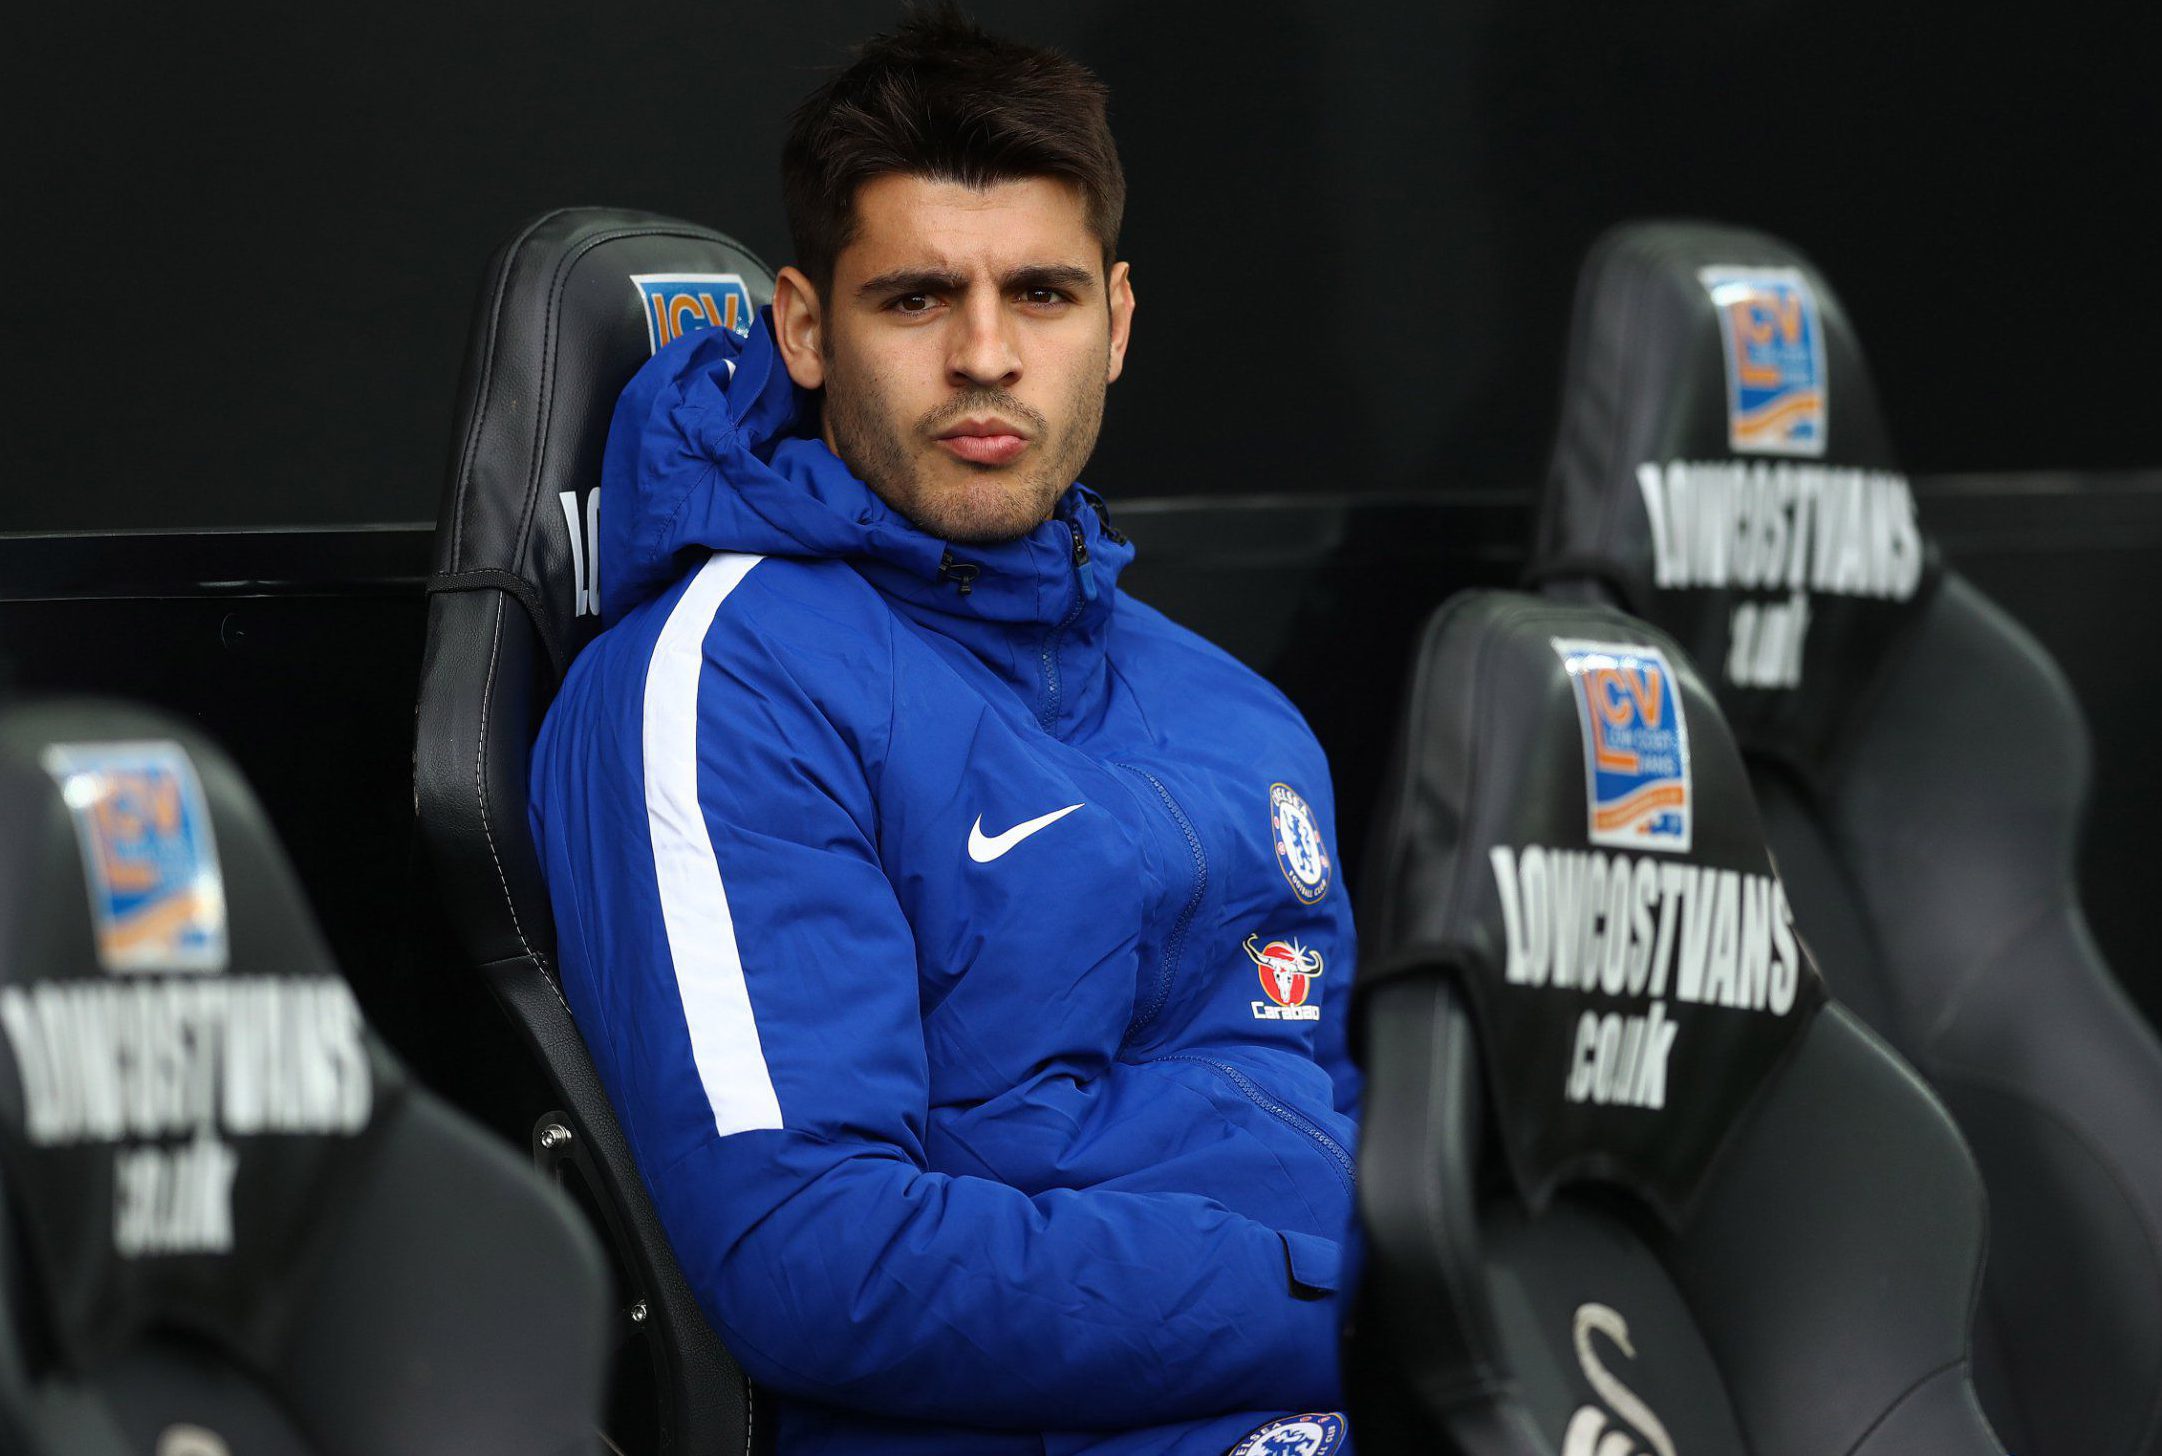 Alvaro Morata wishes Spain good luck at the World Cup after being left out of squad